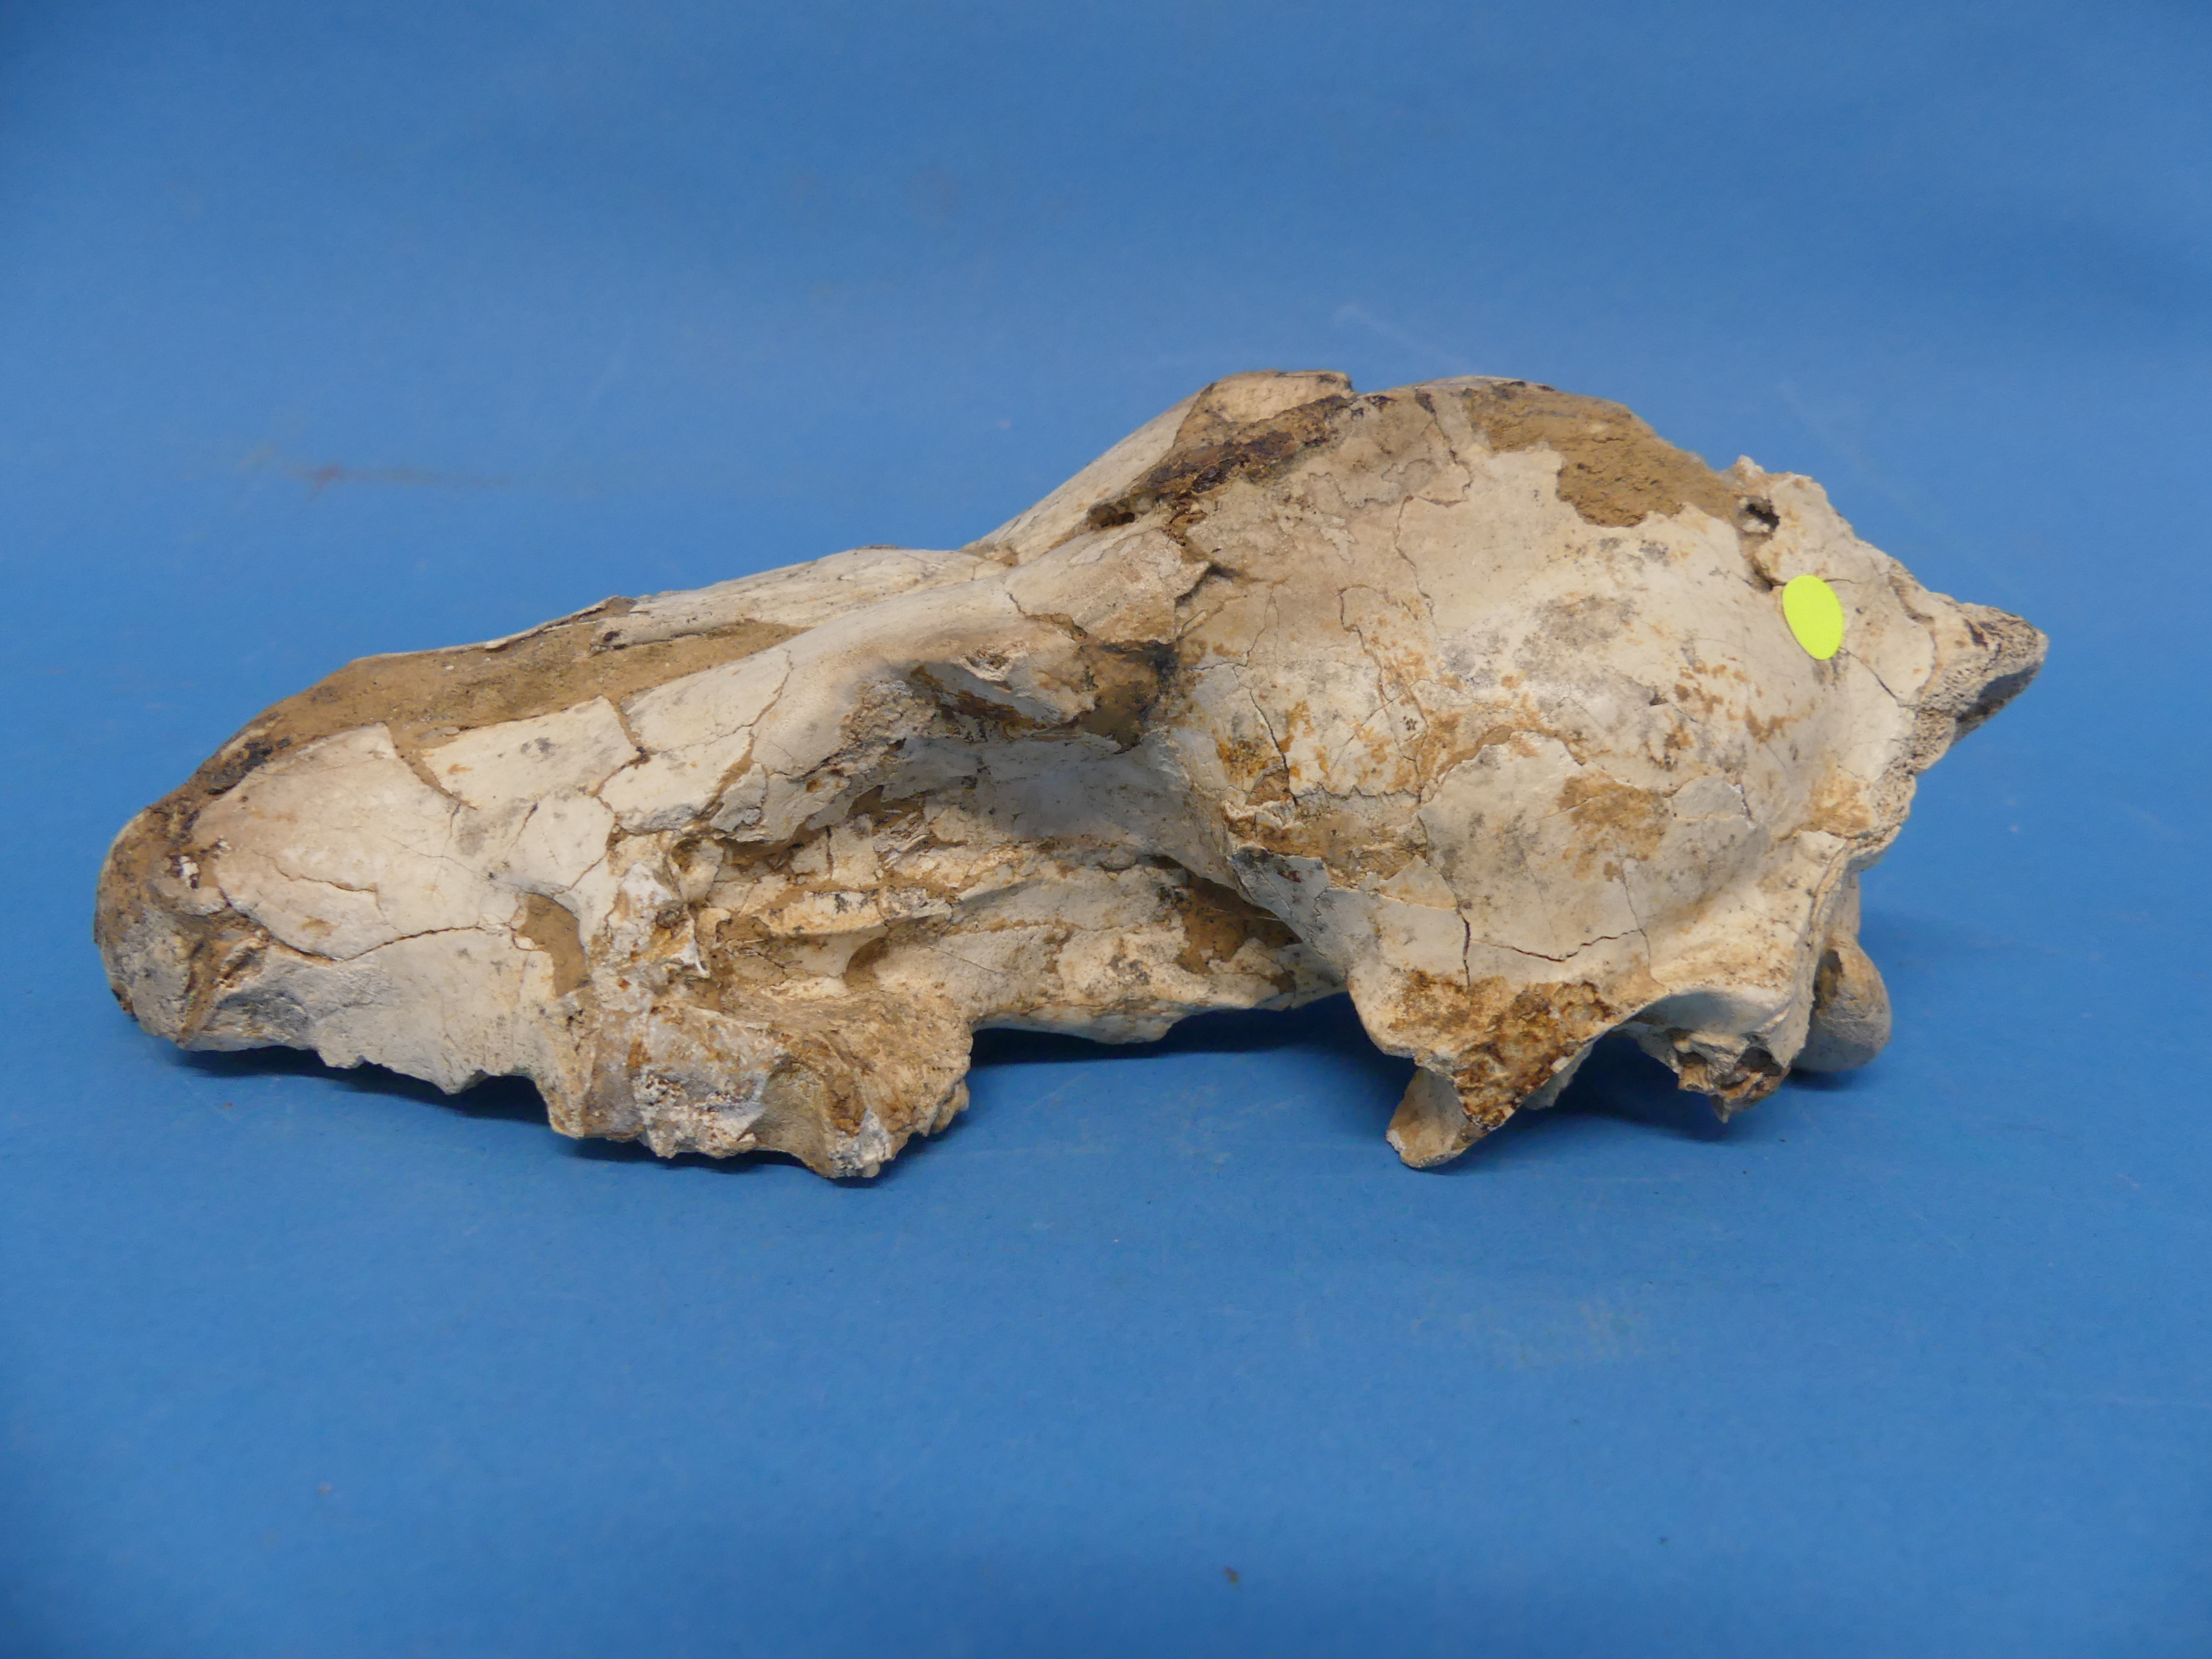 Natural History, Paleontology and Minerals; An Early Wolf (CANIS FALCONERI) Skull, Early Pleistocene - Image 10 of 12